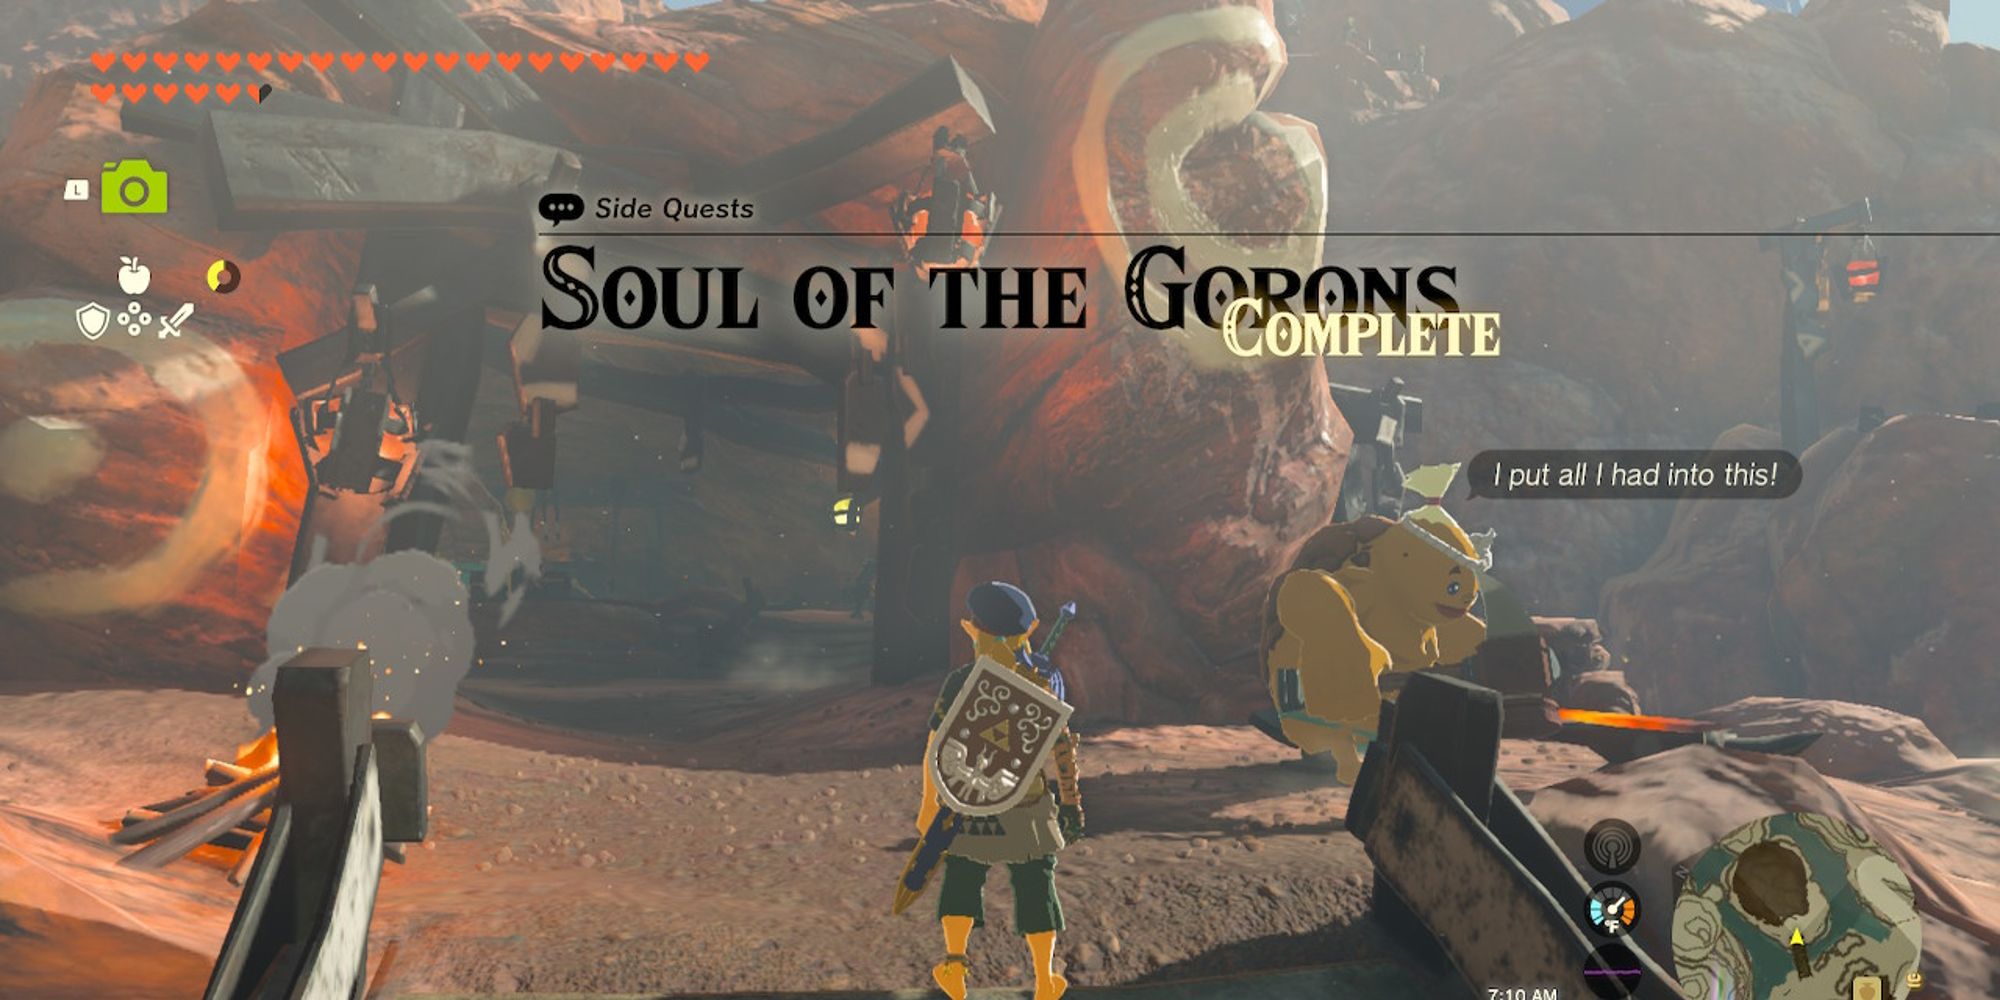 TotK-Soul-Of-The-Gorons-Title-Complete